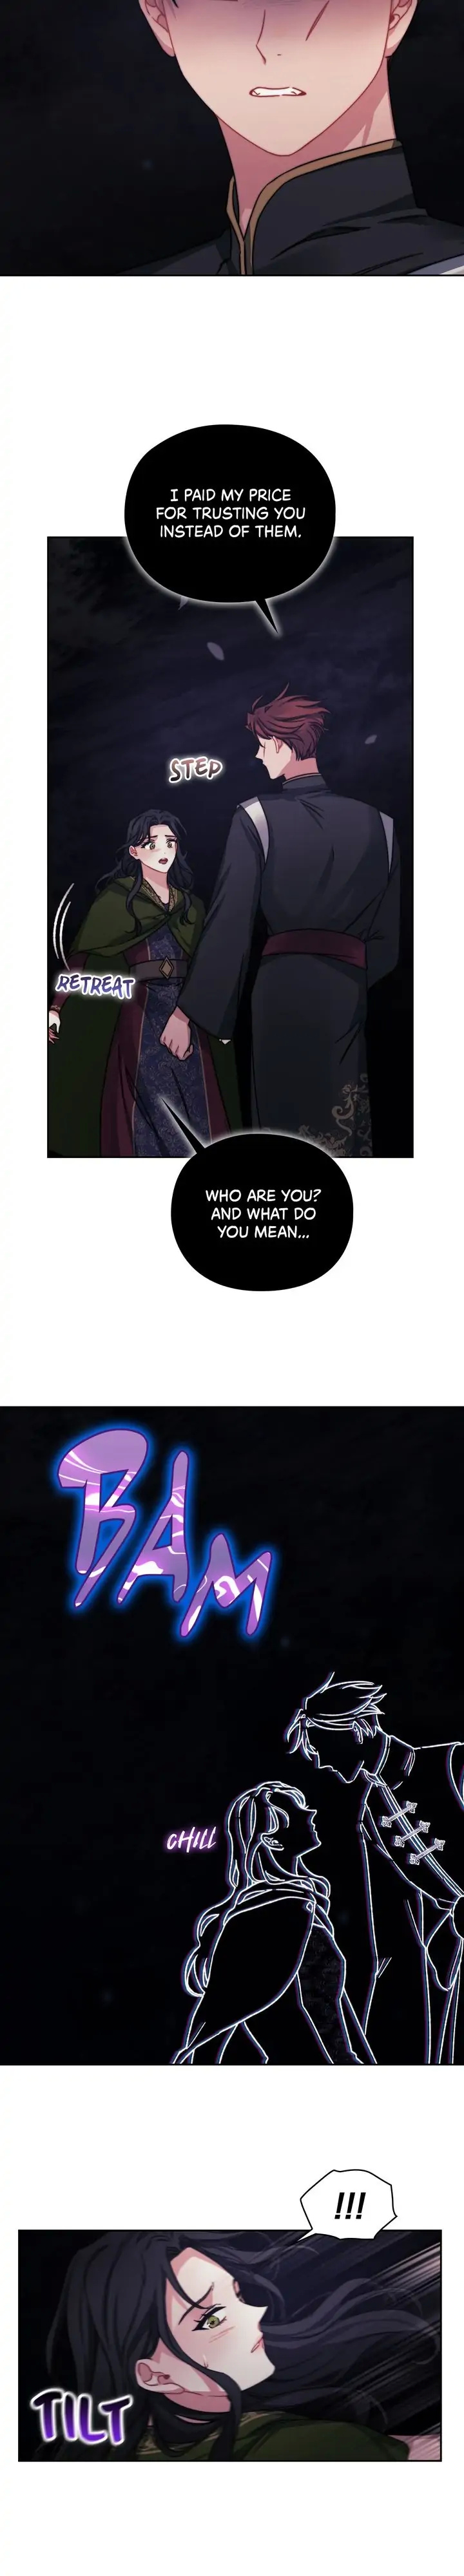 In The Name Of Your Death - Page 2